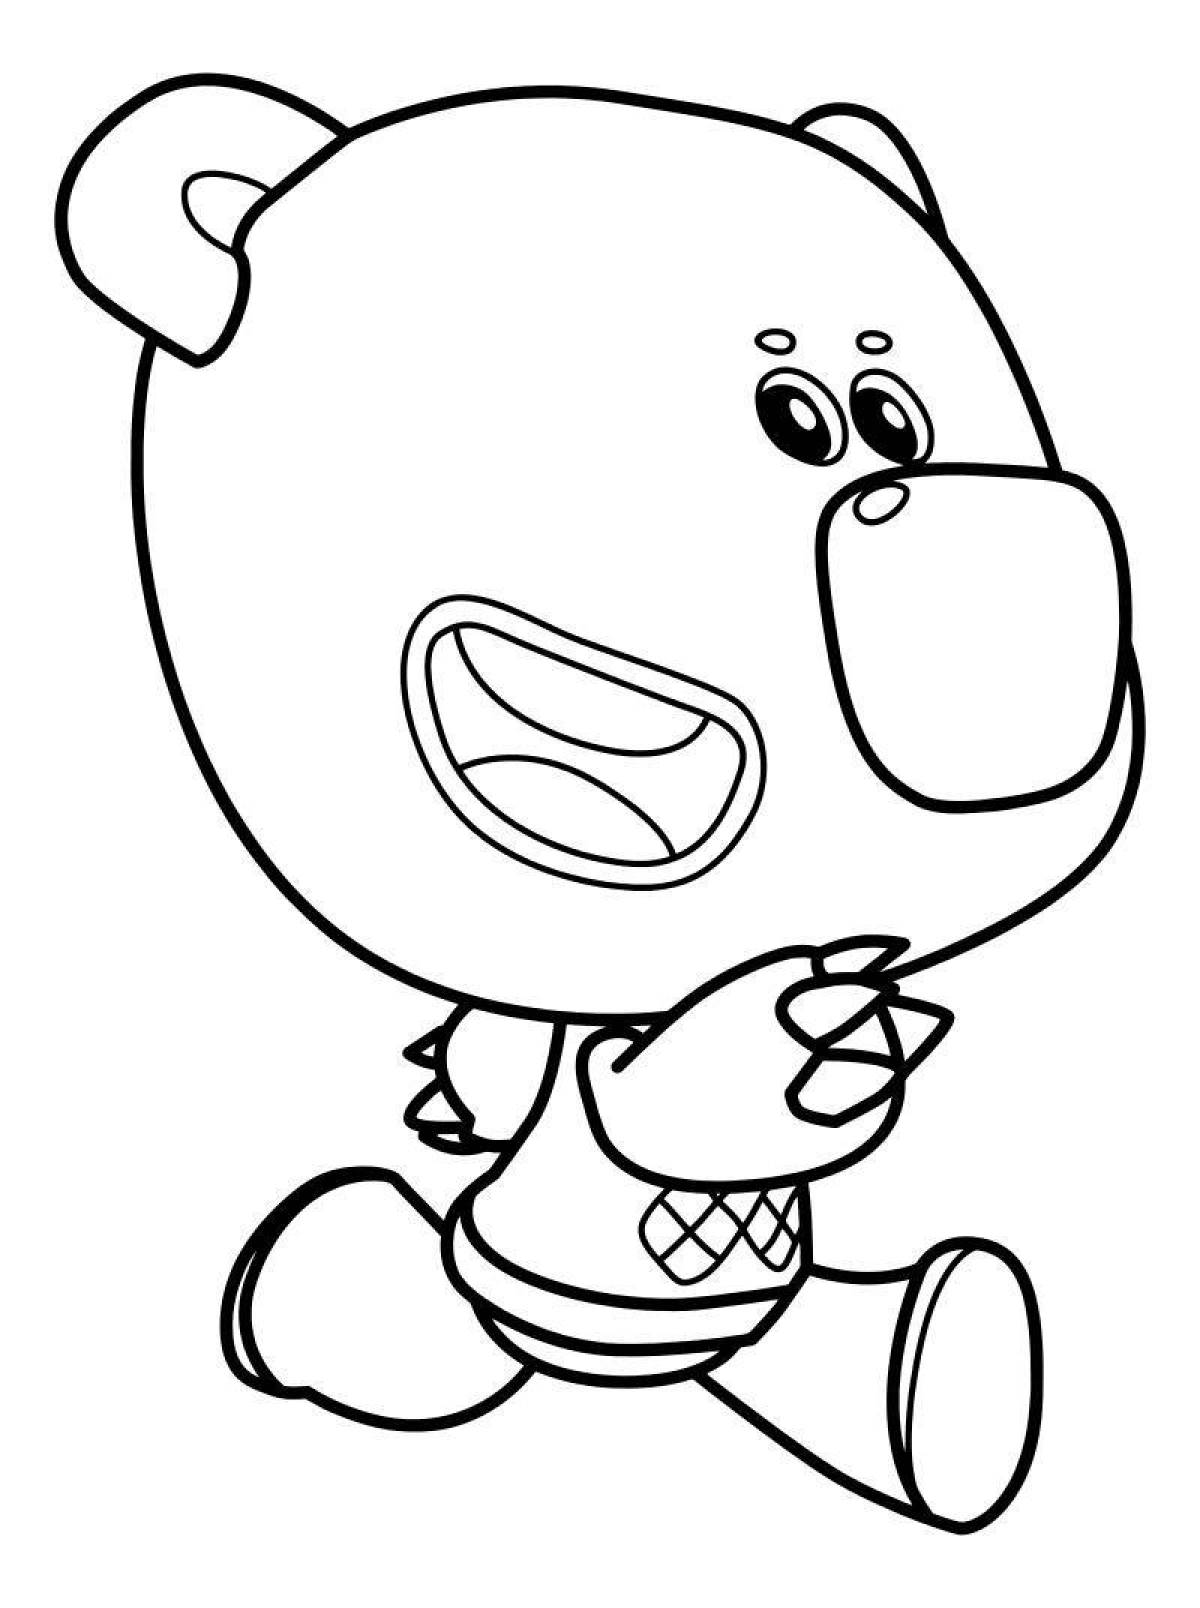 Bright Cartoon Coloring Pages for Mimimishki